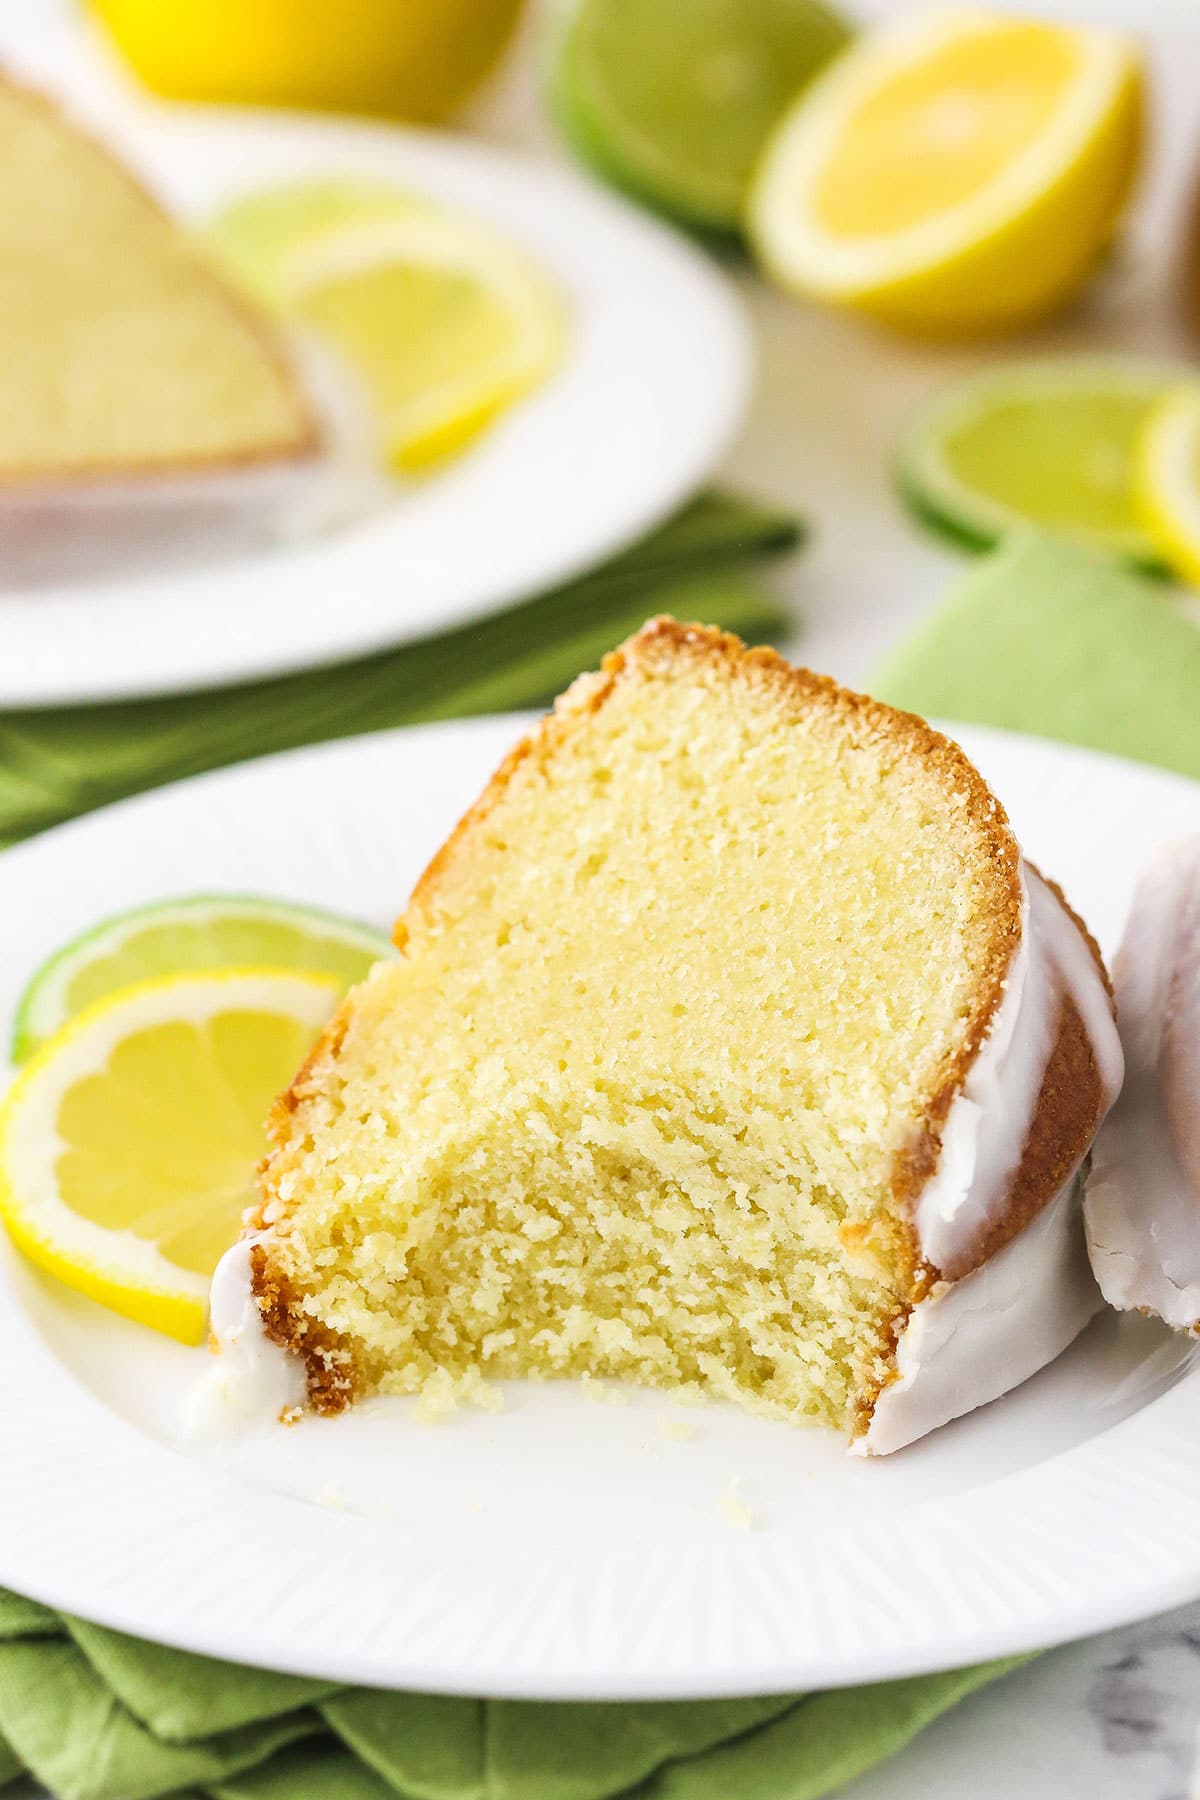 A slice of 7UP pound cake on a plate with one very large bite missing